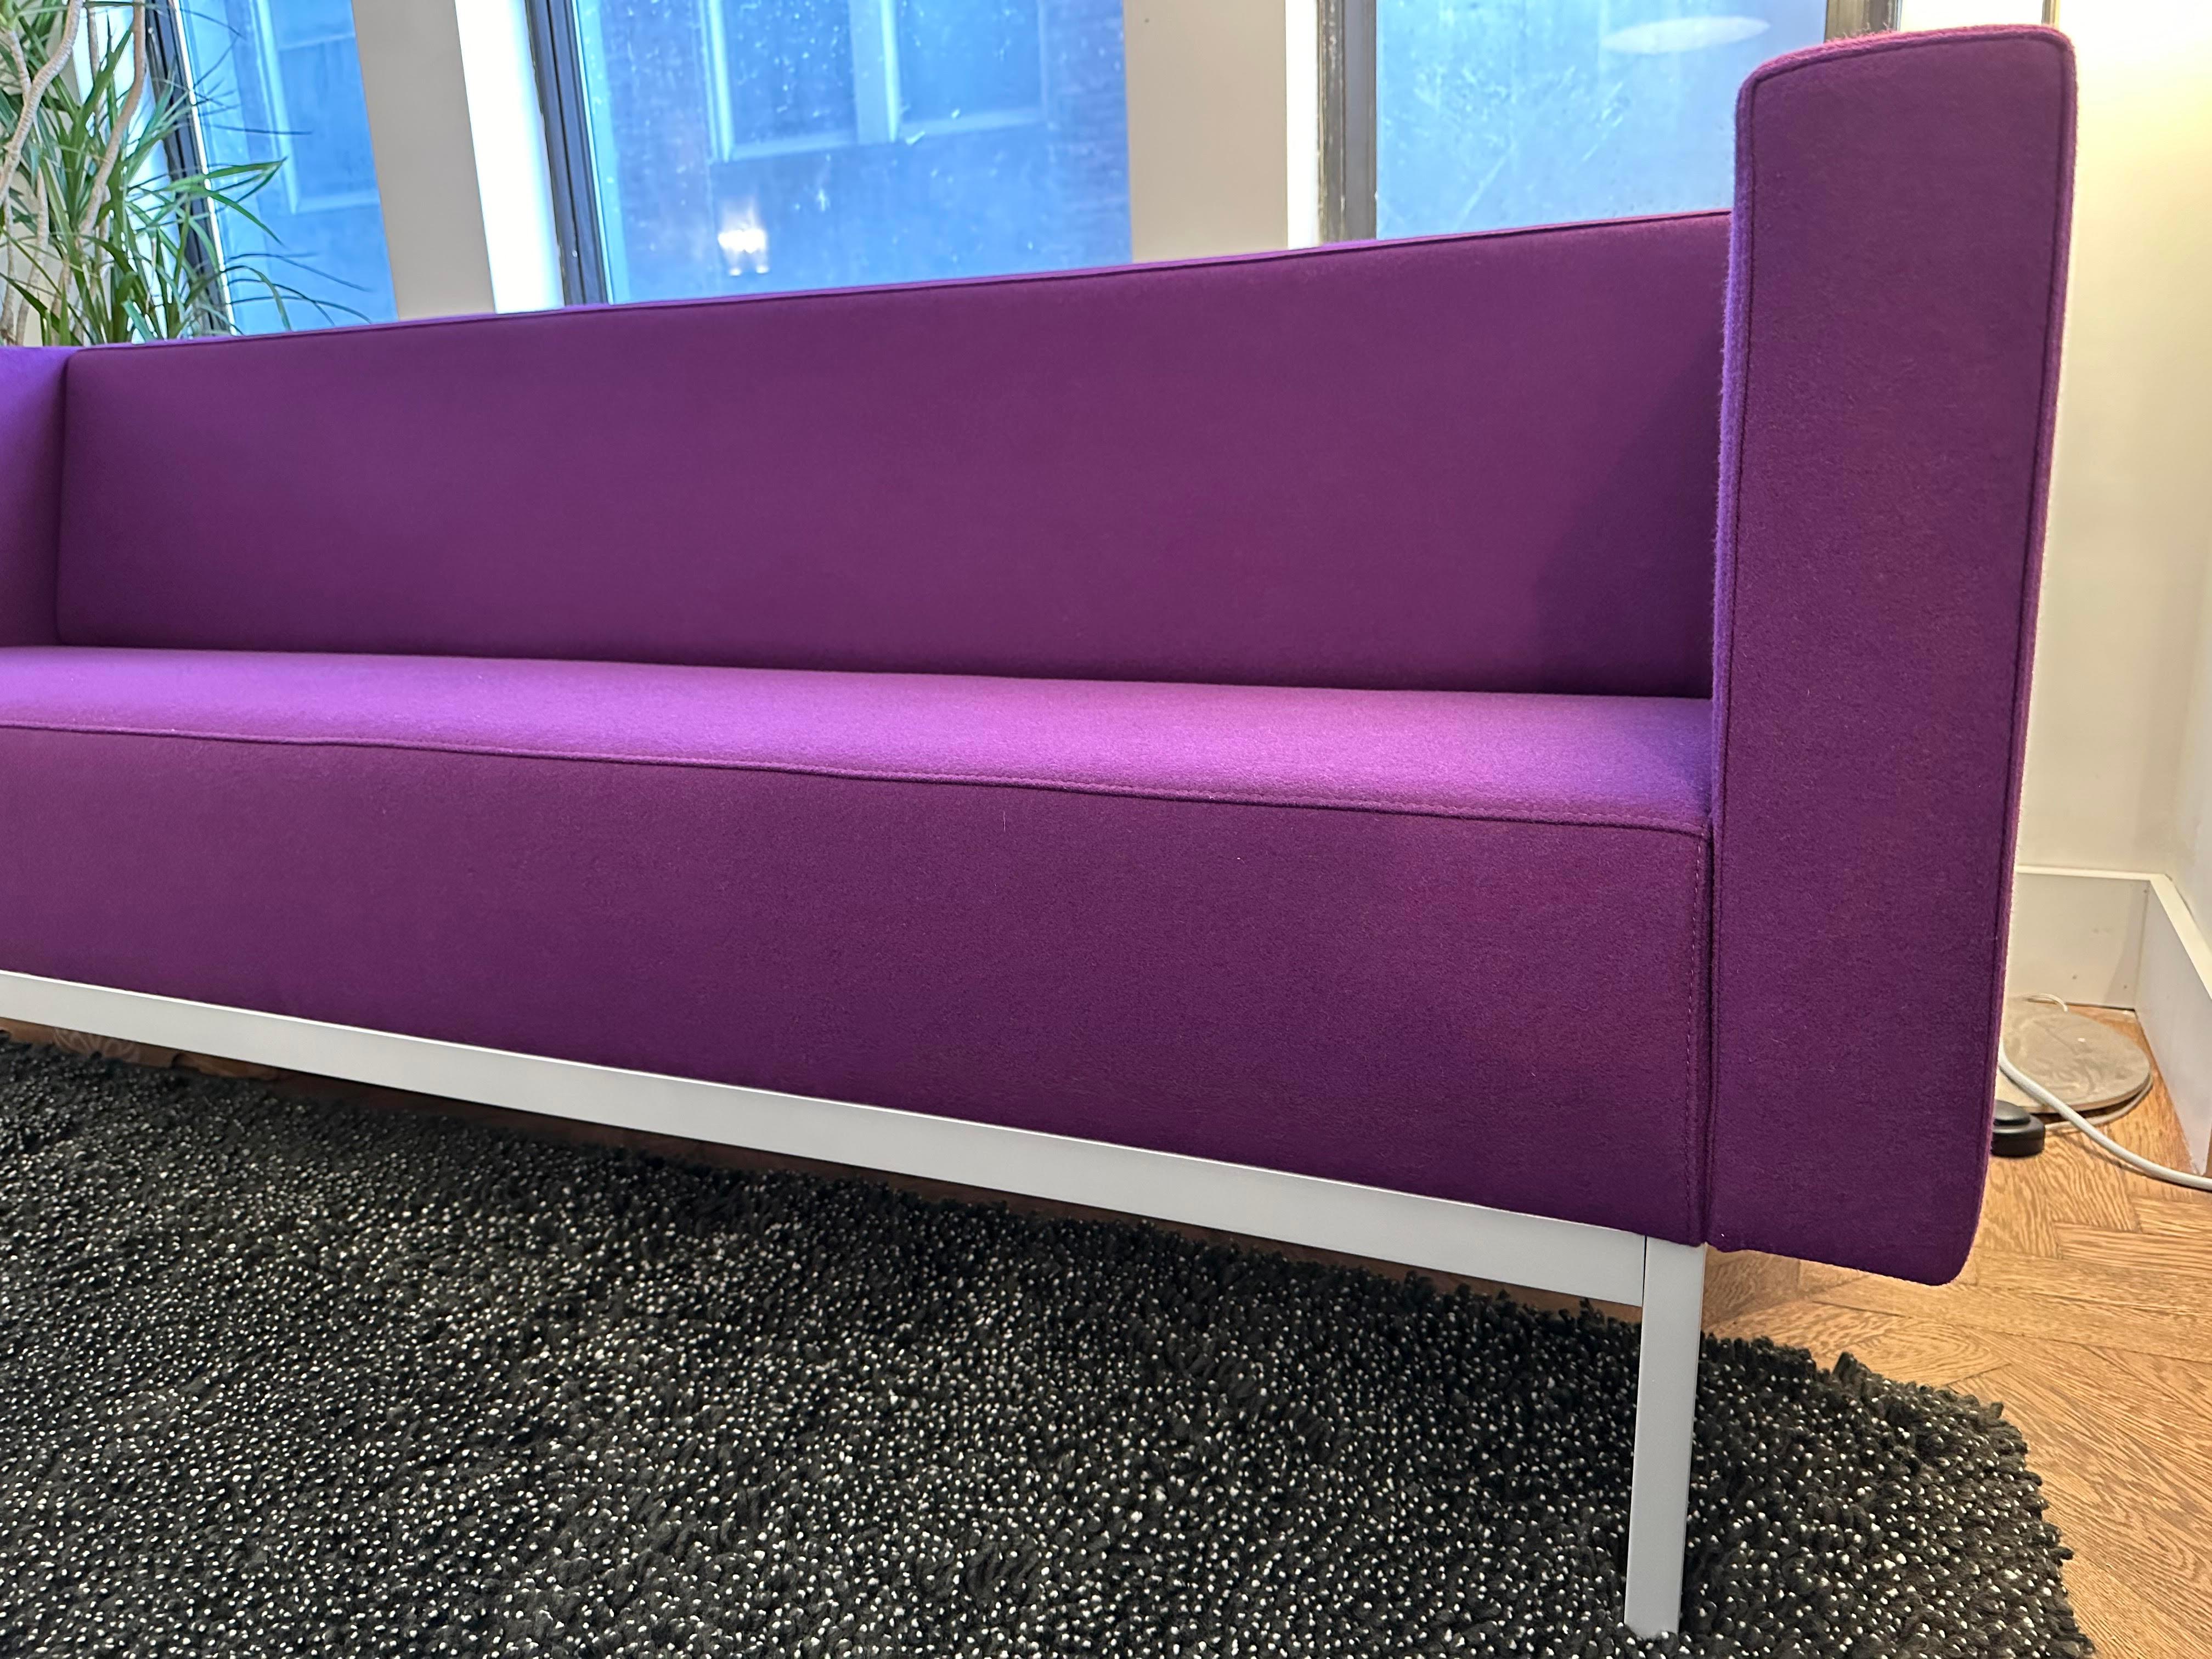 Artifort 070 Sofa, 2.5 Seater with Arms

Dimensions: 207x73cm
Fabric: Kvadrat Divina 3 - Color 696
Base Finish: P13 Aluminum metallic
(texture)

Simply slim, clean lines, an elegant base. There is such a thing as timeless design. With its pleasant,